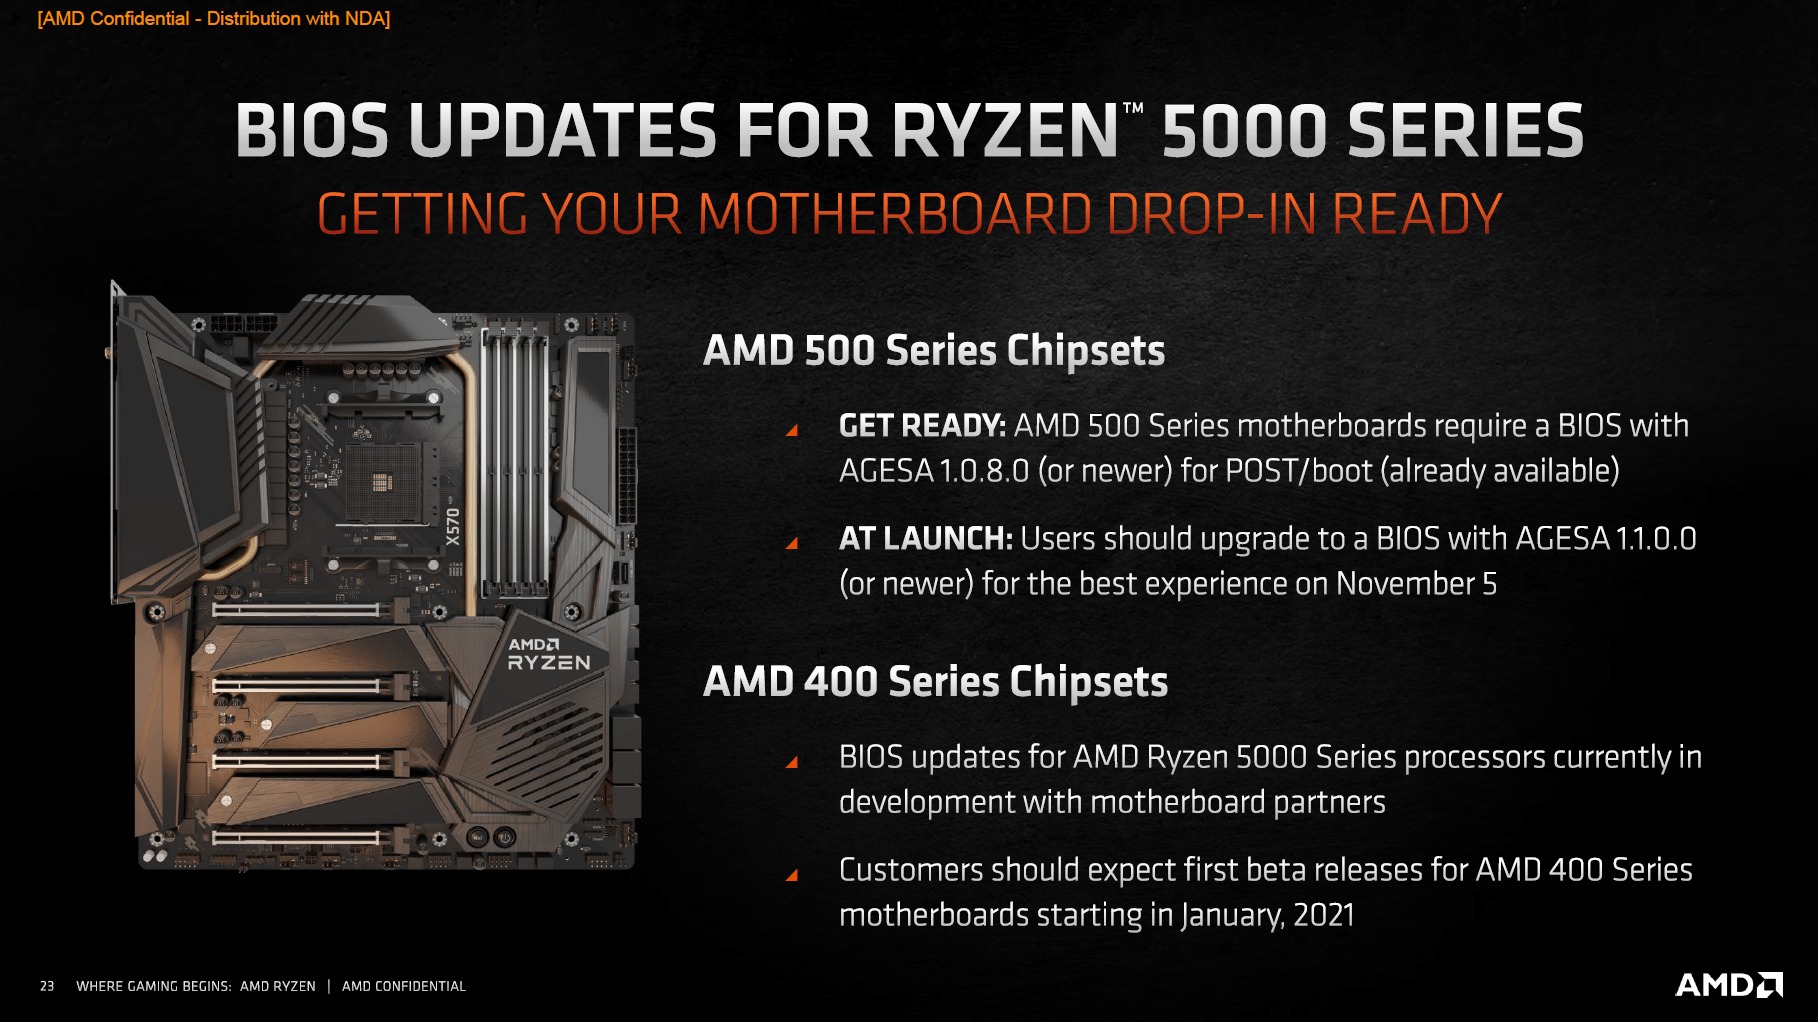 These AMD 400 and 500 series motherboards already support Ryzen 5000